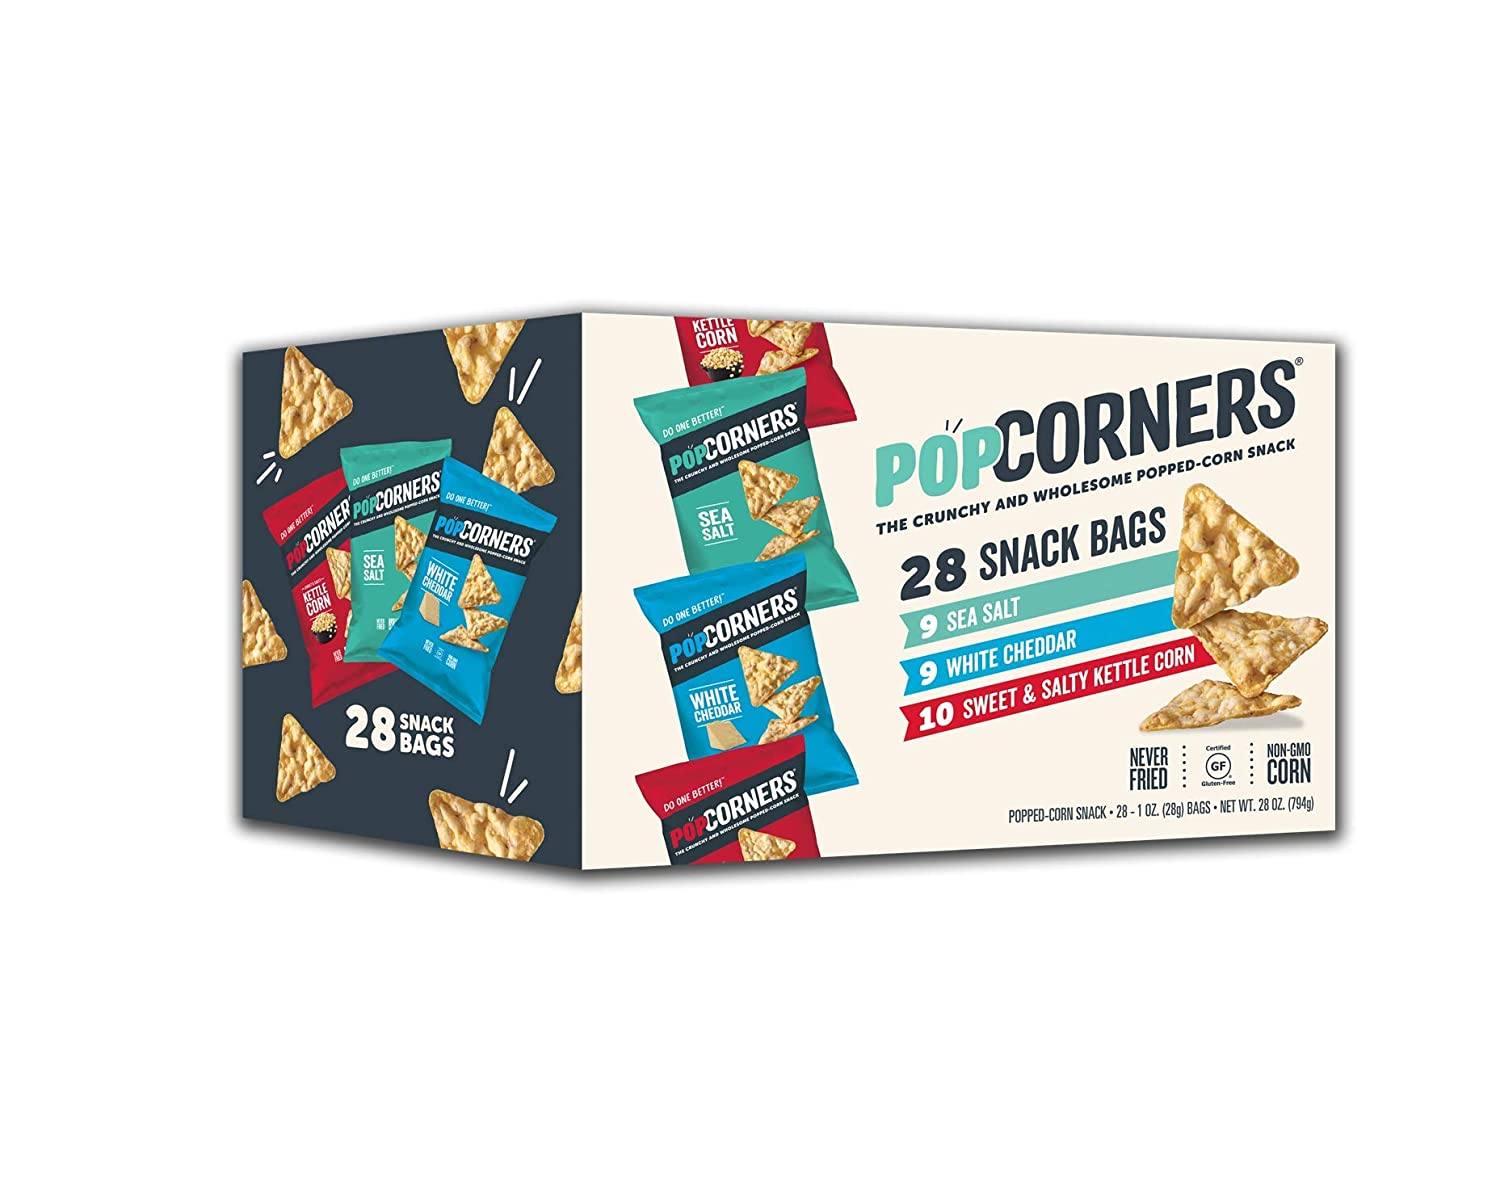 Popcorners - The Crunchy and Wholesome Popped-corn Snack Popcorners Variety 1 Oz-28 Count 